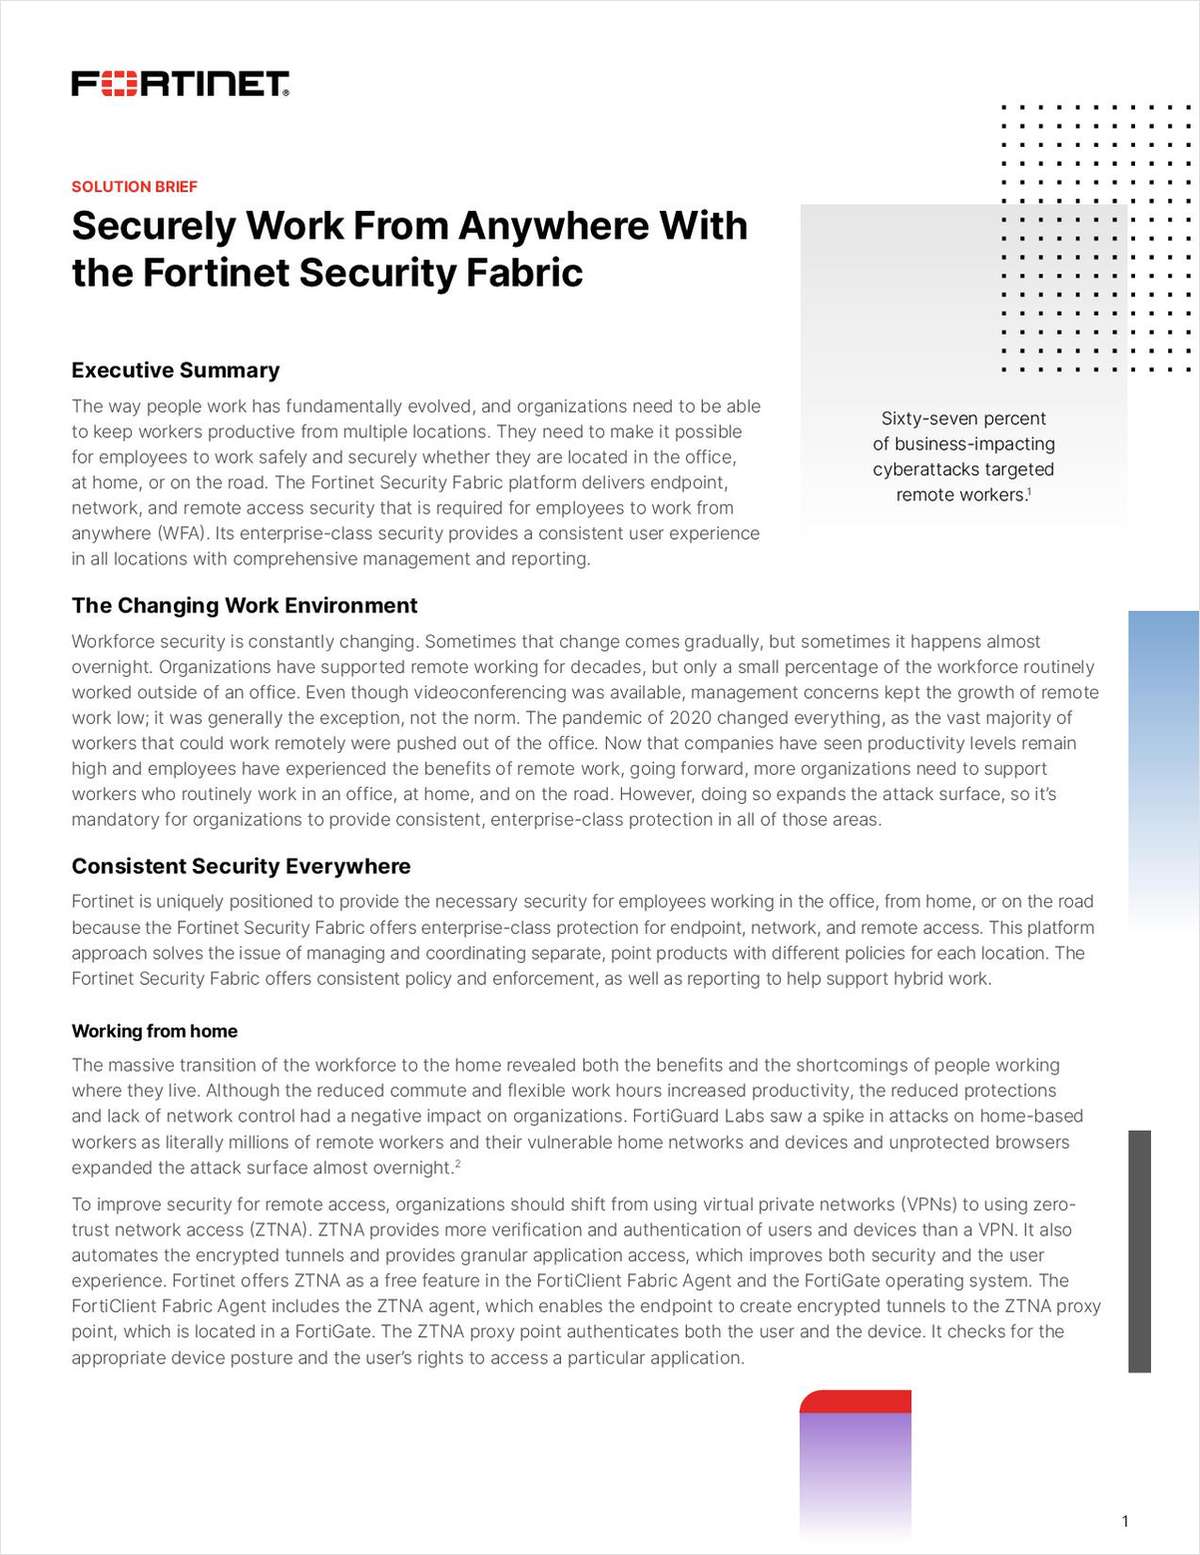 Securely Work From Anywhere With the Fortinet Security Fabric